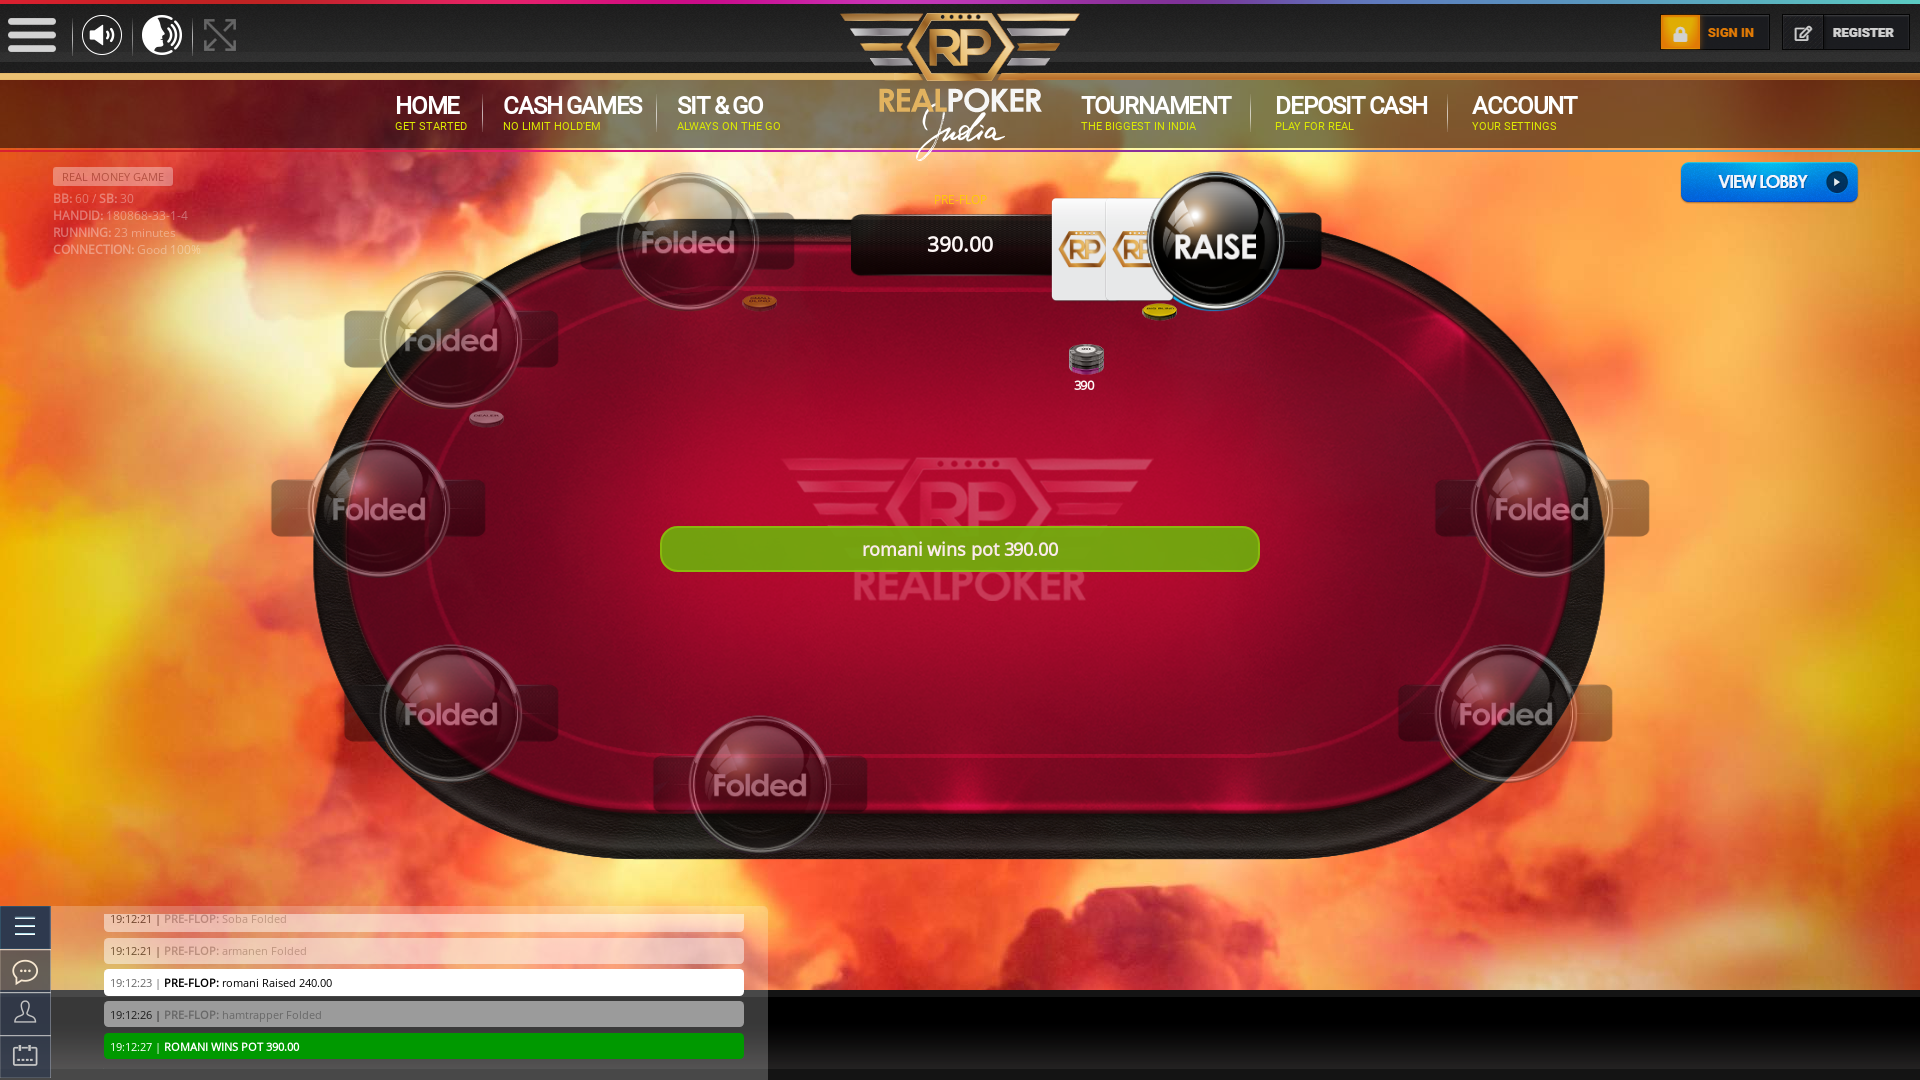 Noida online poker game on a 10 player table in the 23rd minute of the match